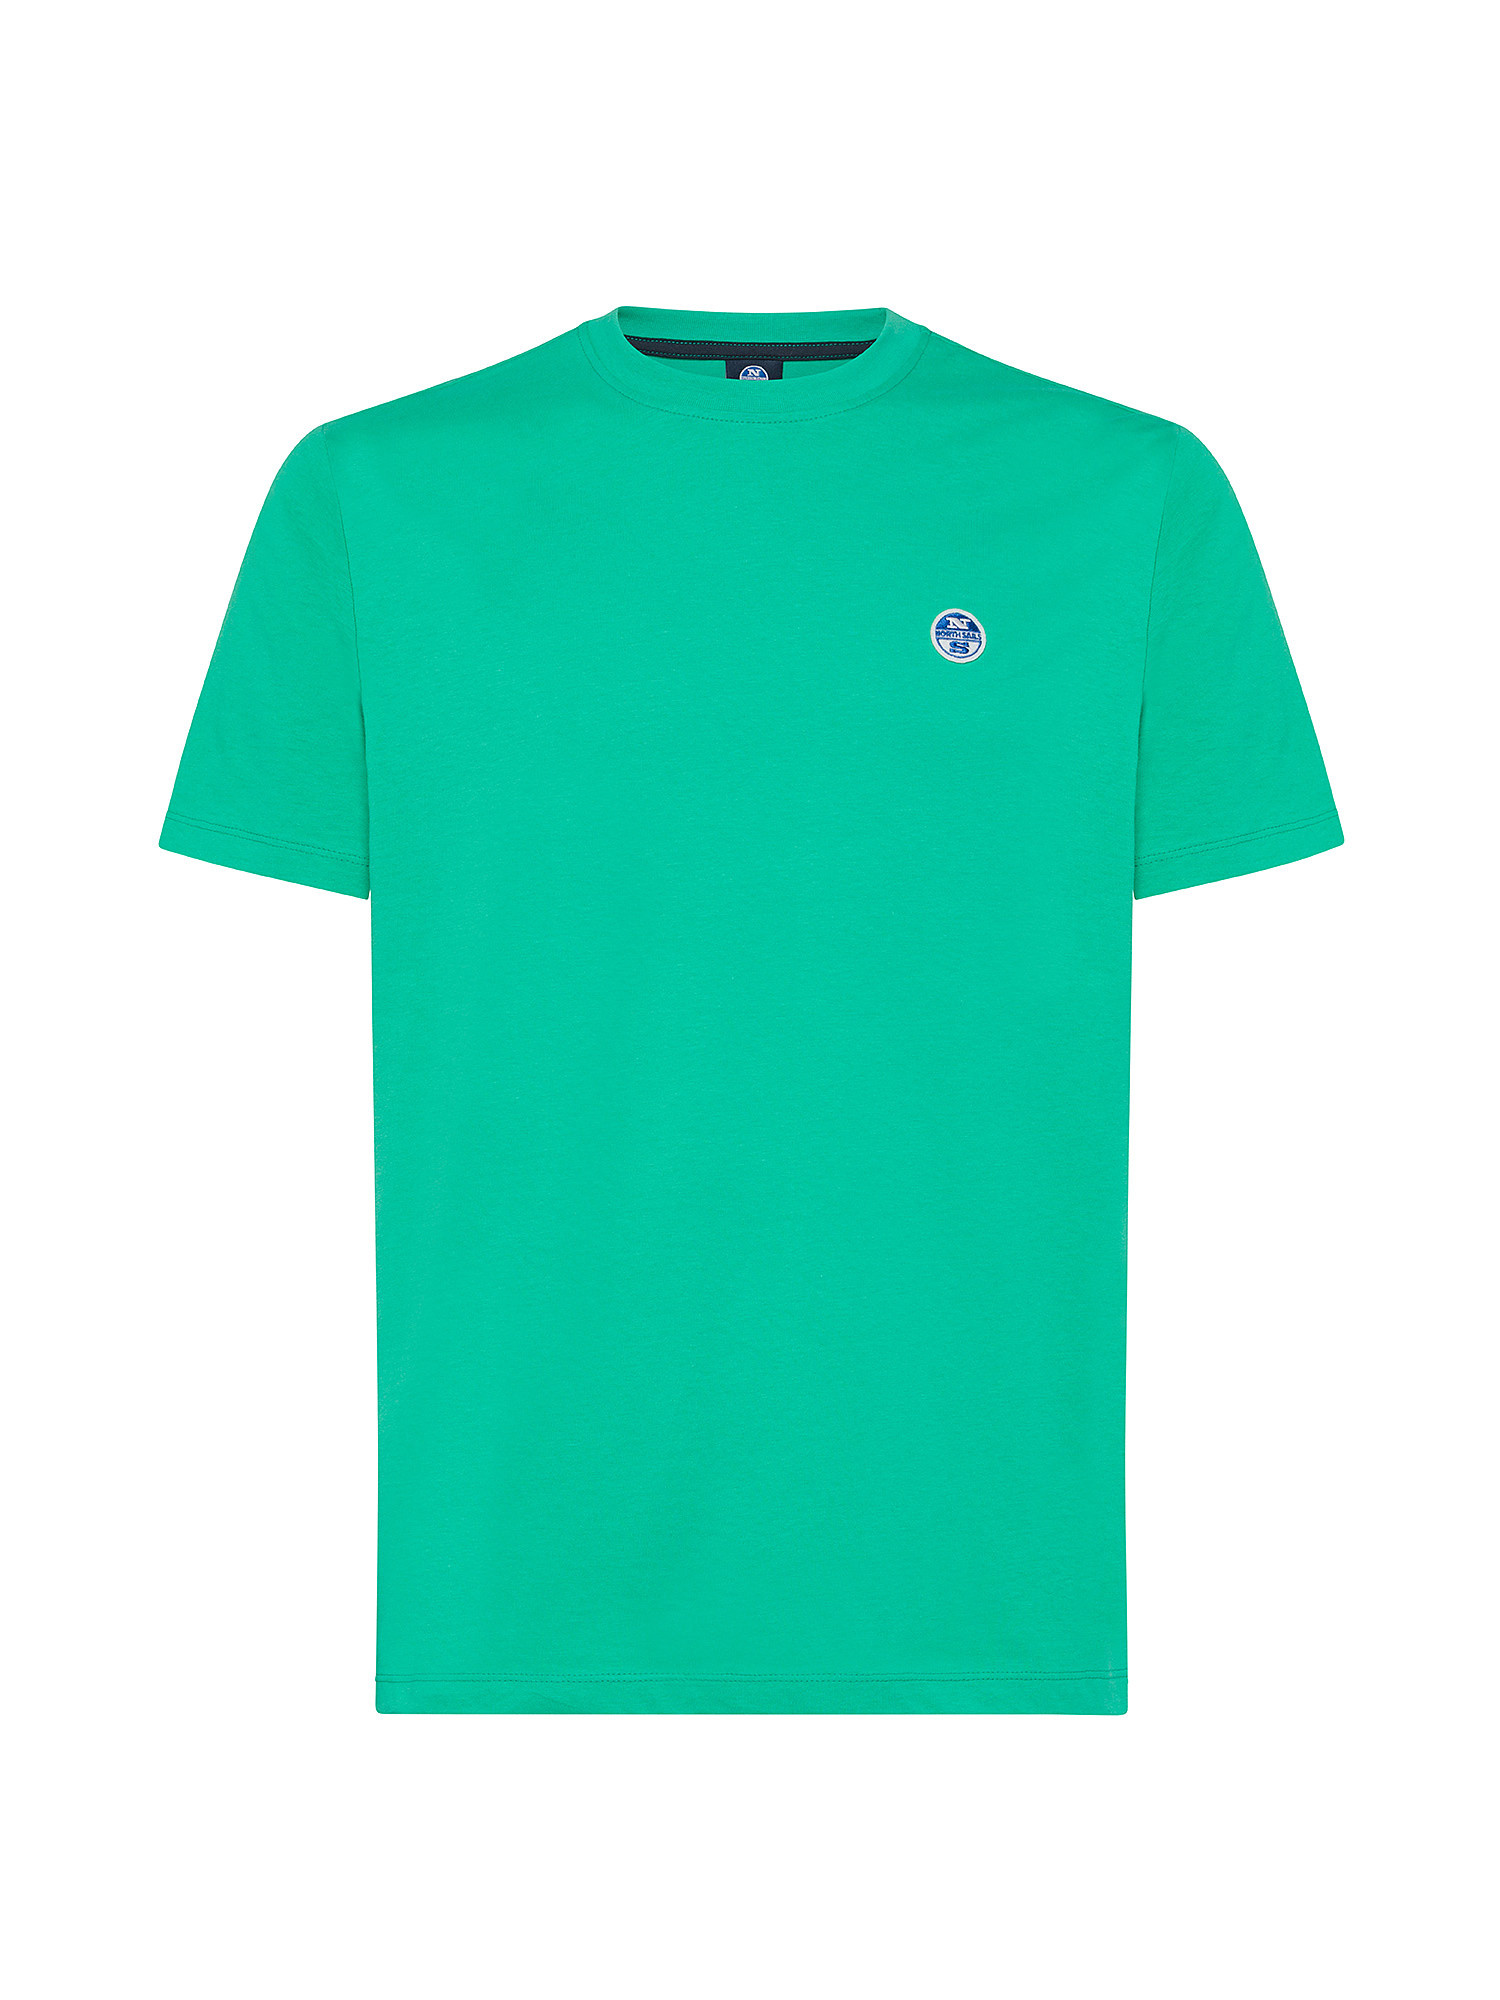 North Sails - Organic cotton jersey T-shirt with micrologo, Green, large image number 0